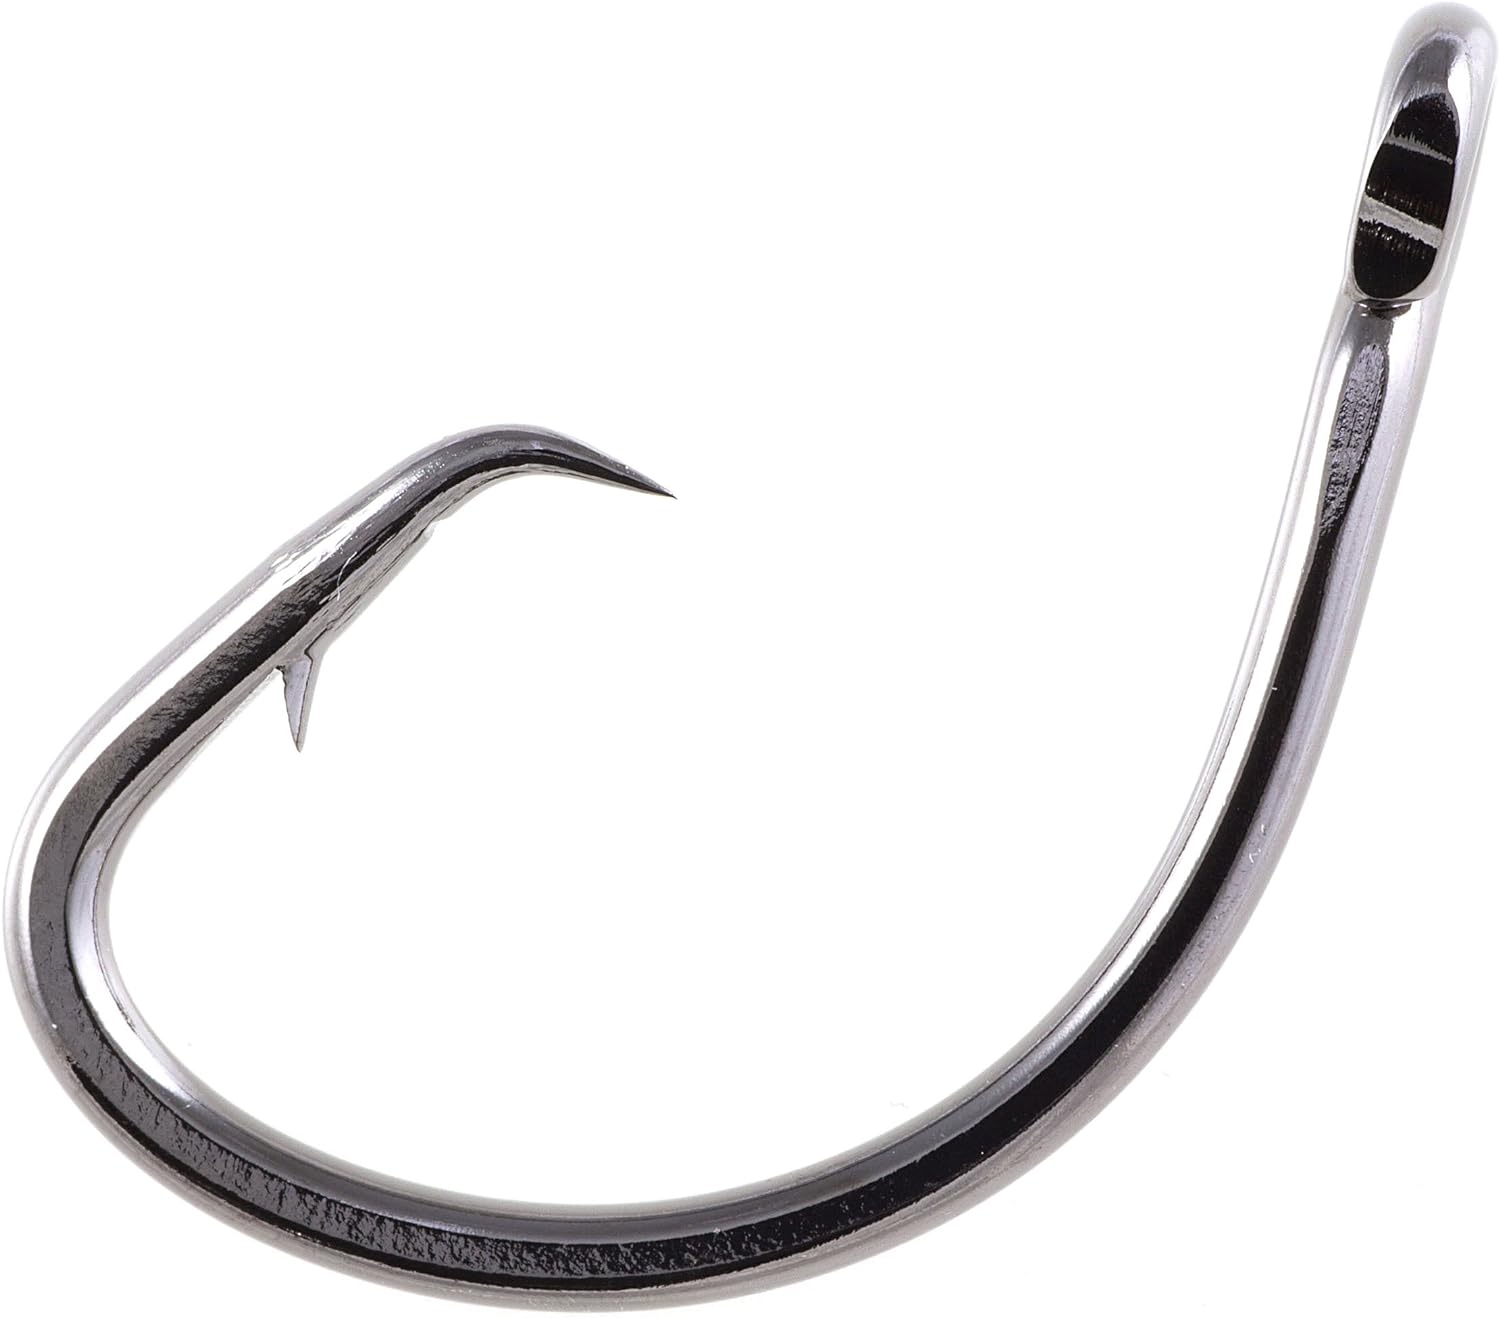 Owner 5163-151 Saltwater Hooks 4 Pack Size 5/0 [HNR0435-0438] - $7.19 :  Almost Alive Lures, The best there ever was.